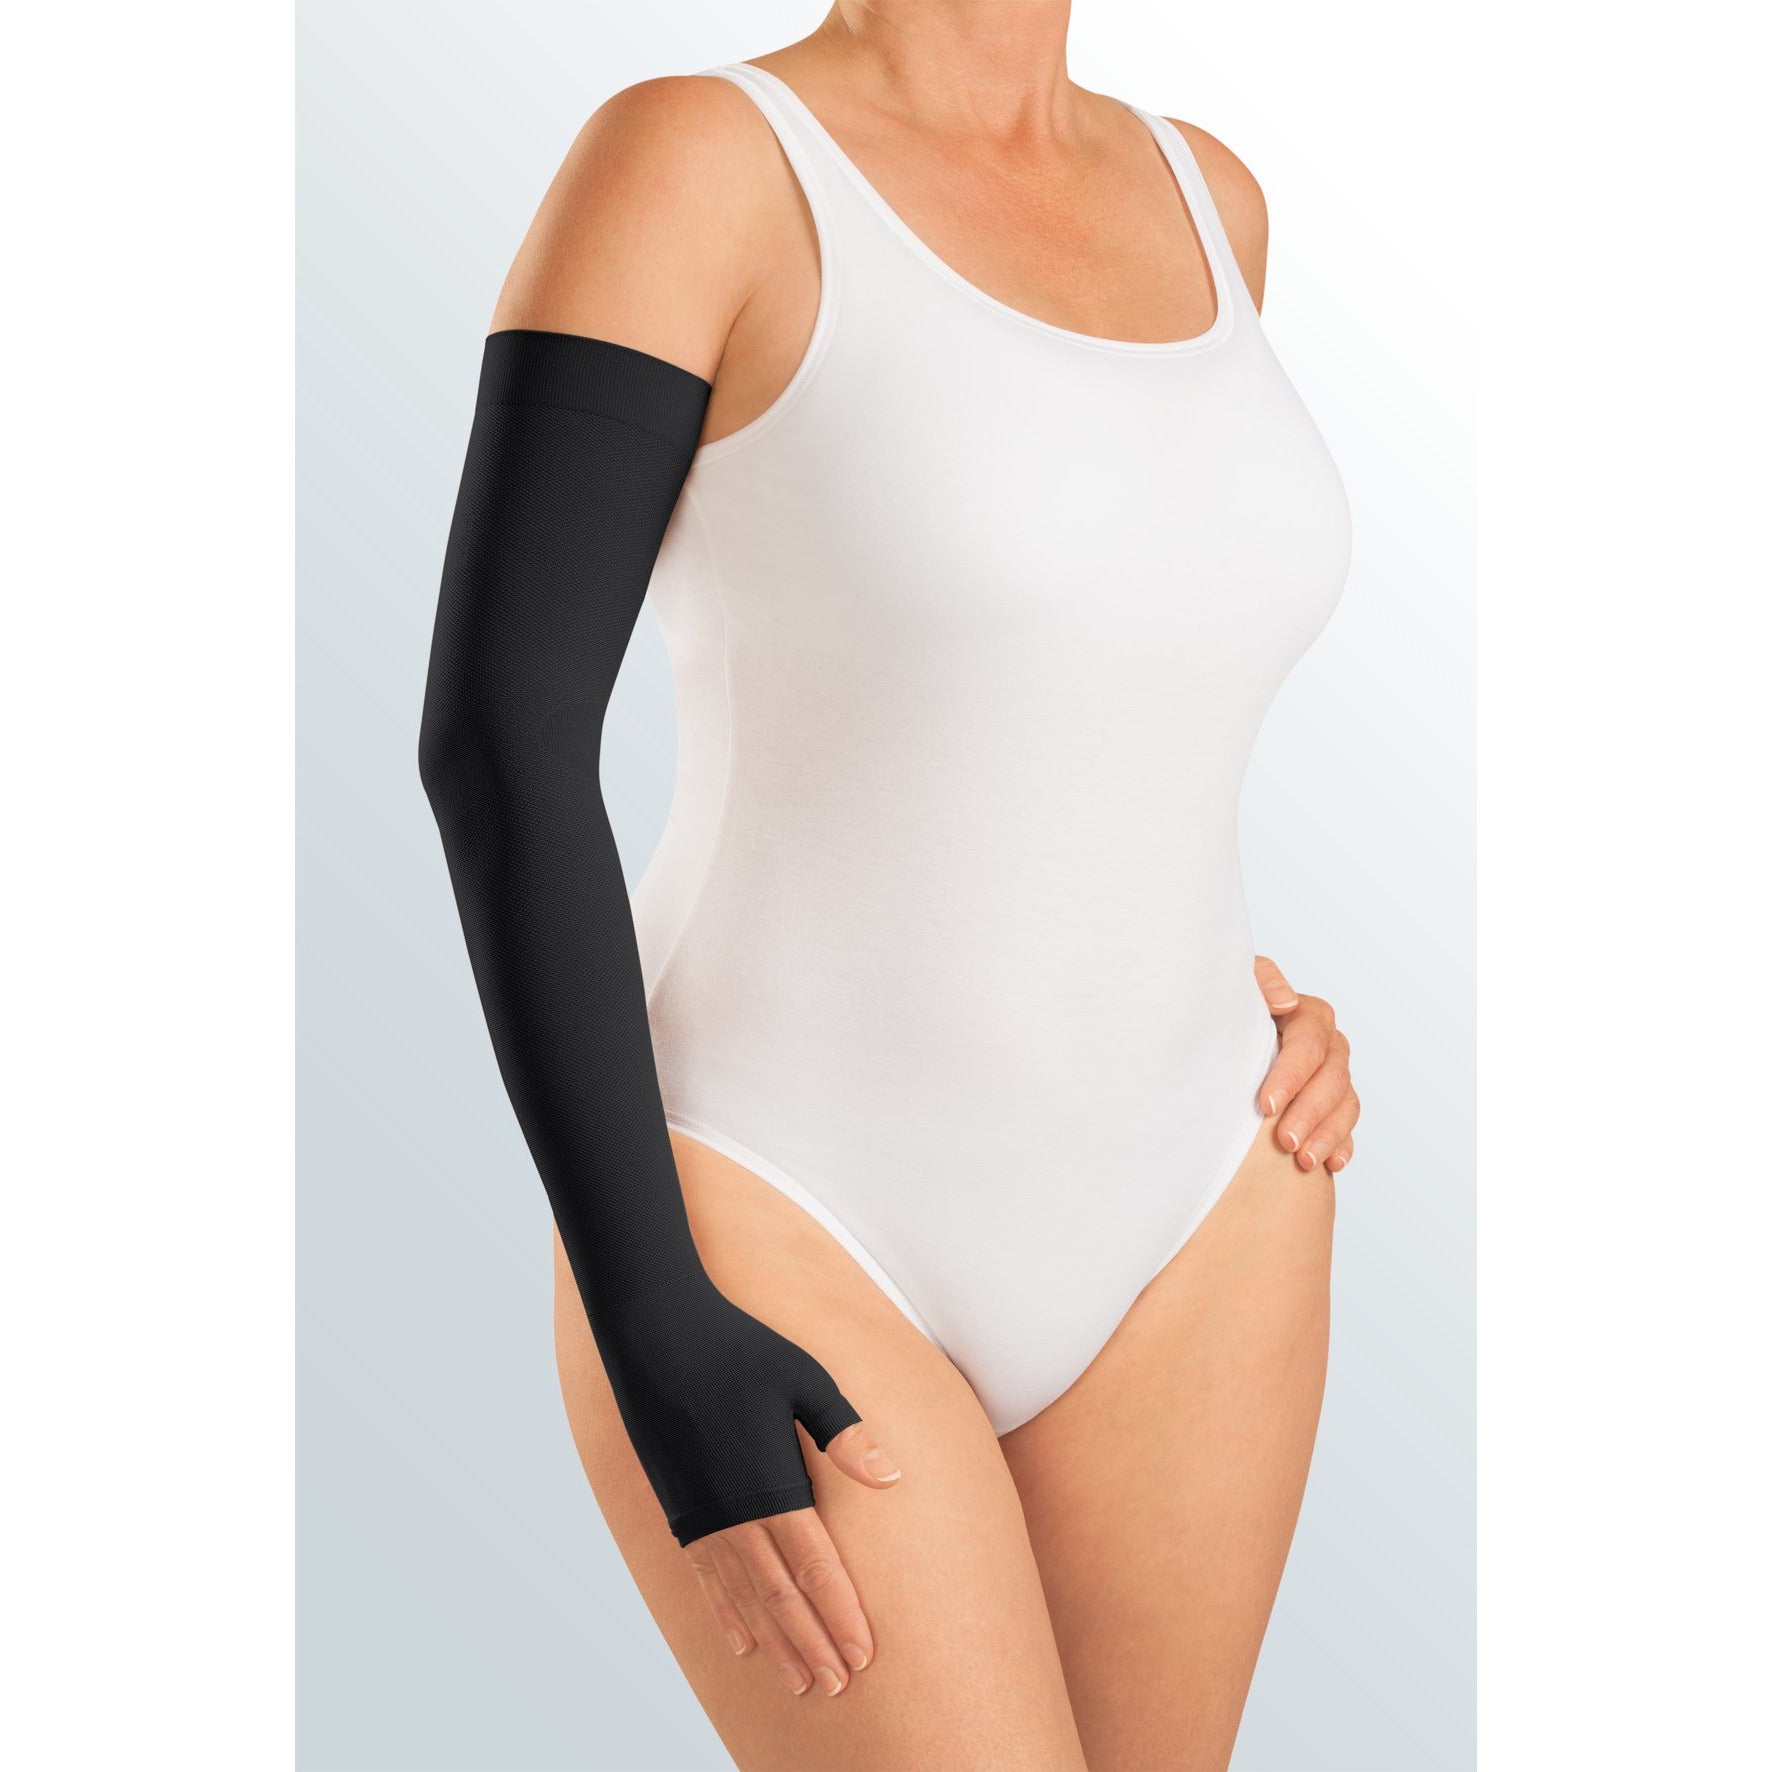 Mediven Harmony 20-30 mmHg Armsleeve w/ Gauntlet and Beaded Silicone Top Band, Black